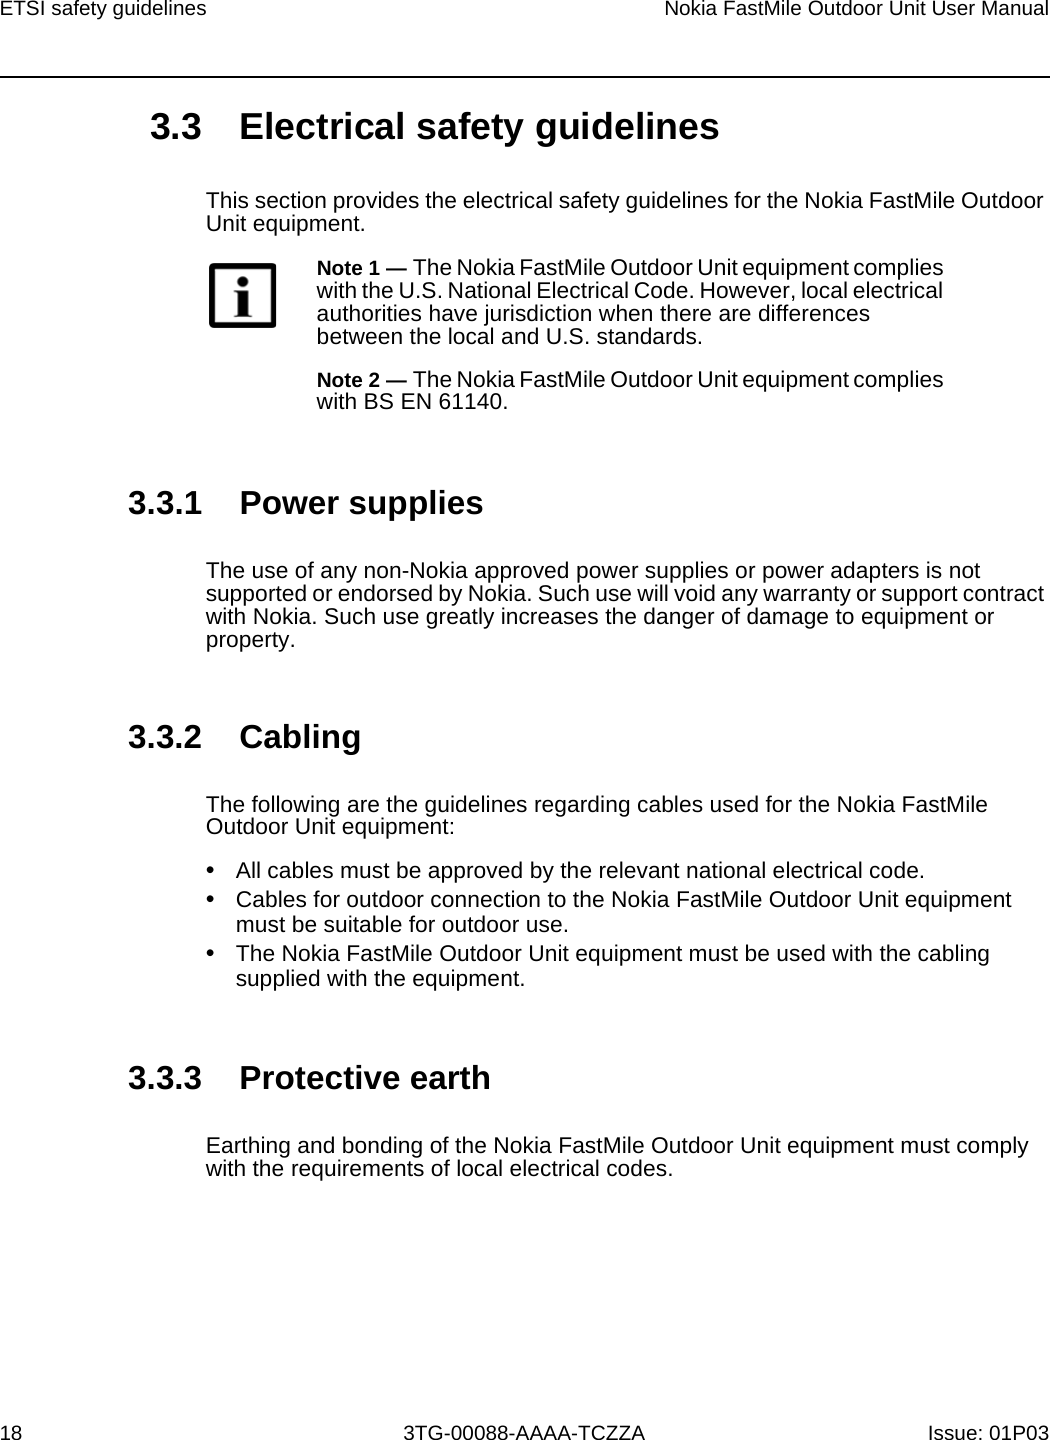 Page 17 of Nokia Bell 34003800FM20 FastMile Compact User Manual Nokia FastMile Outdoor Unit